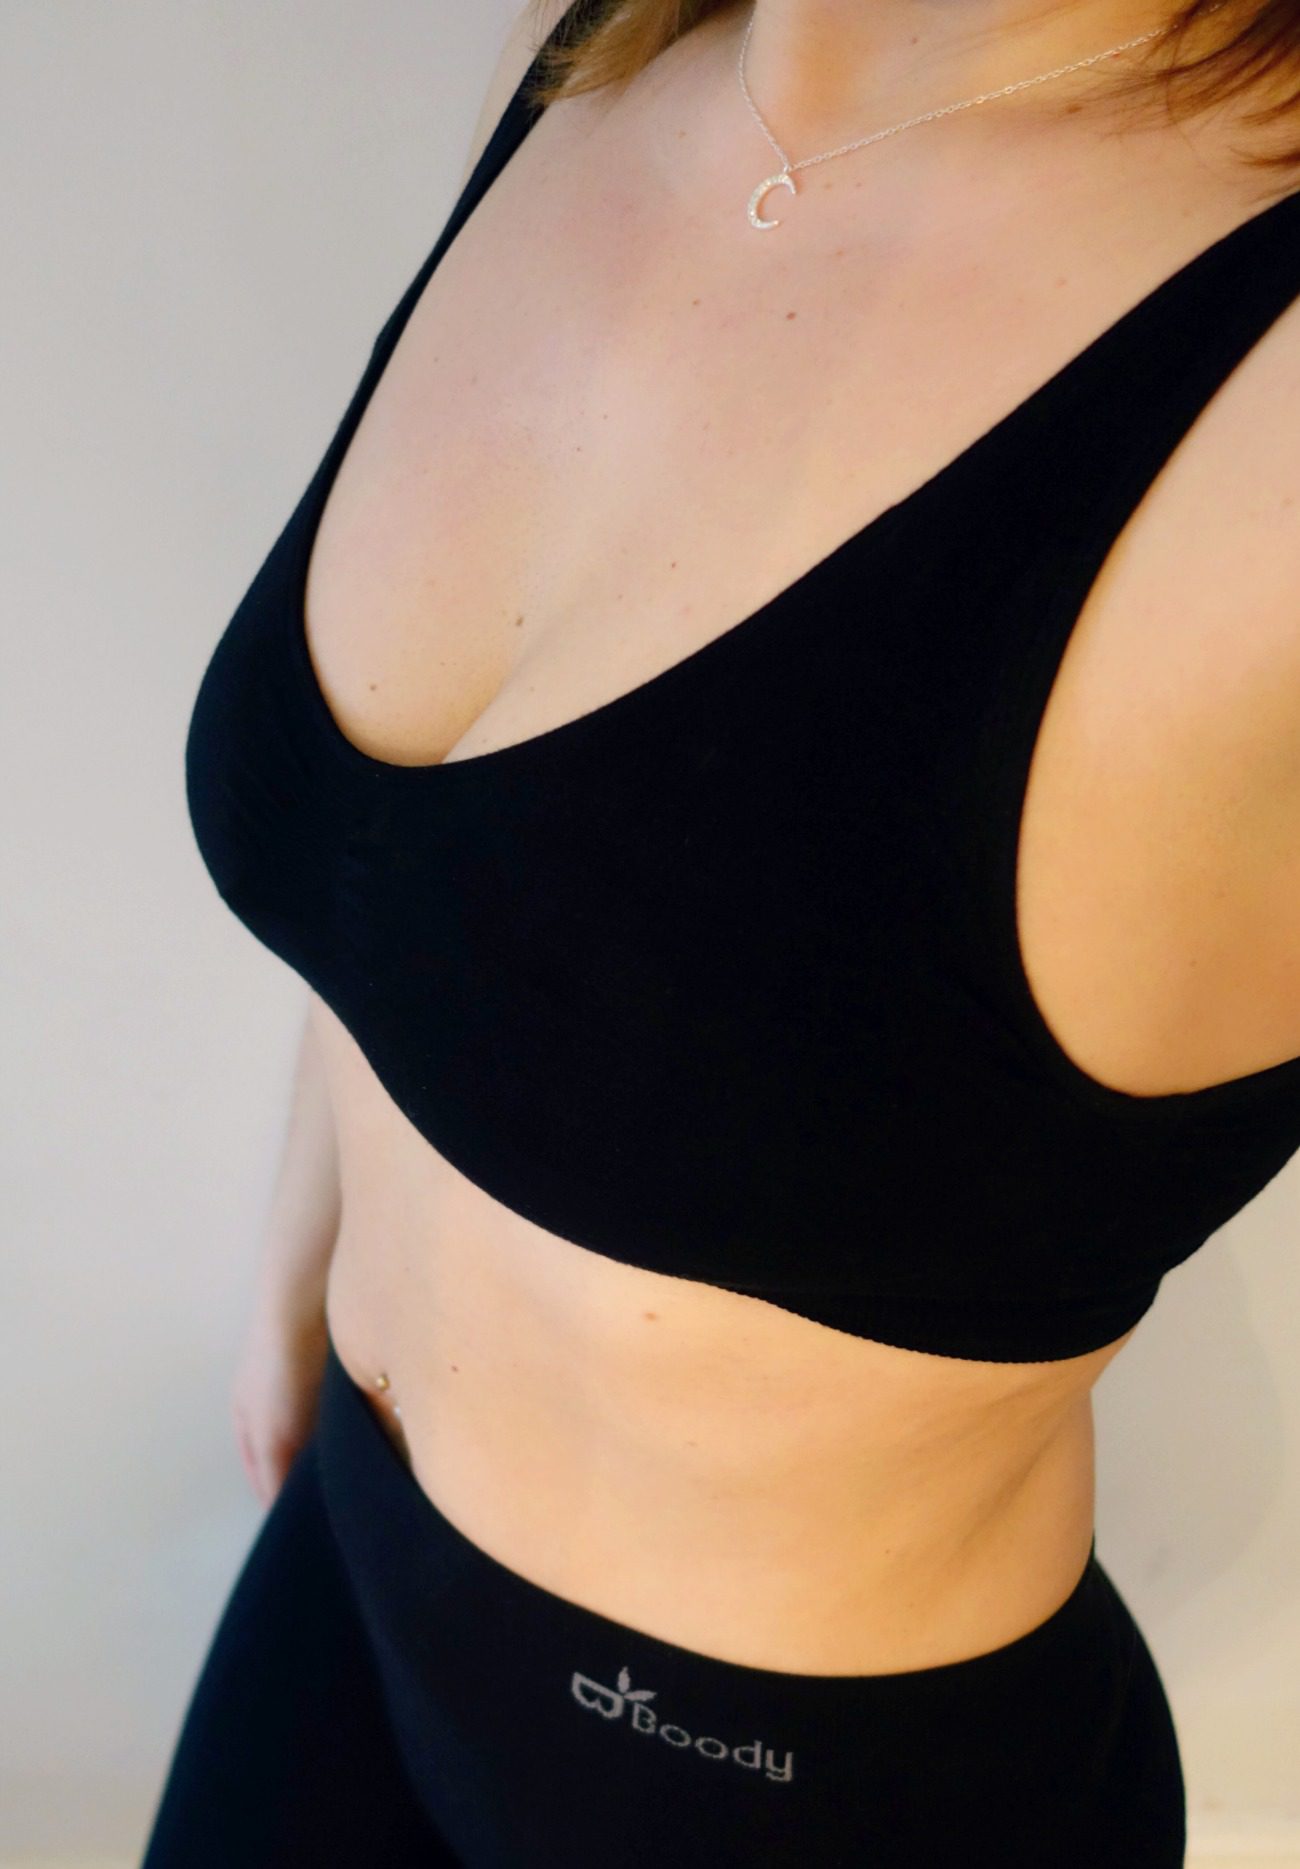 Boody Eco Wear Review